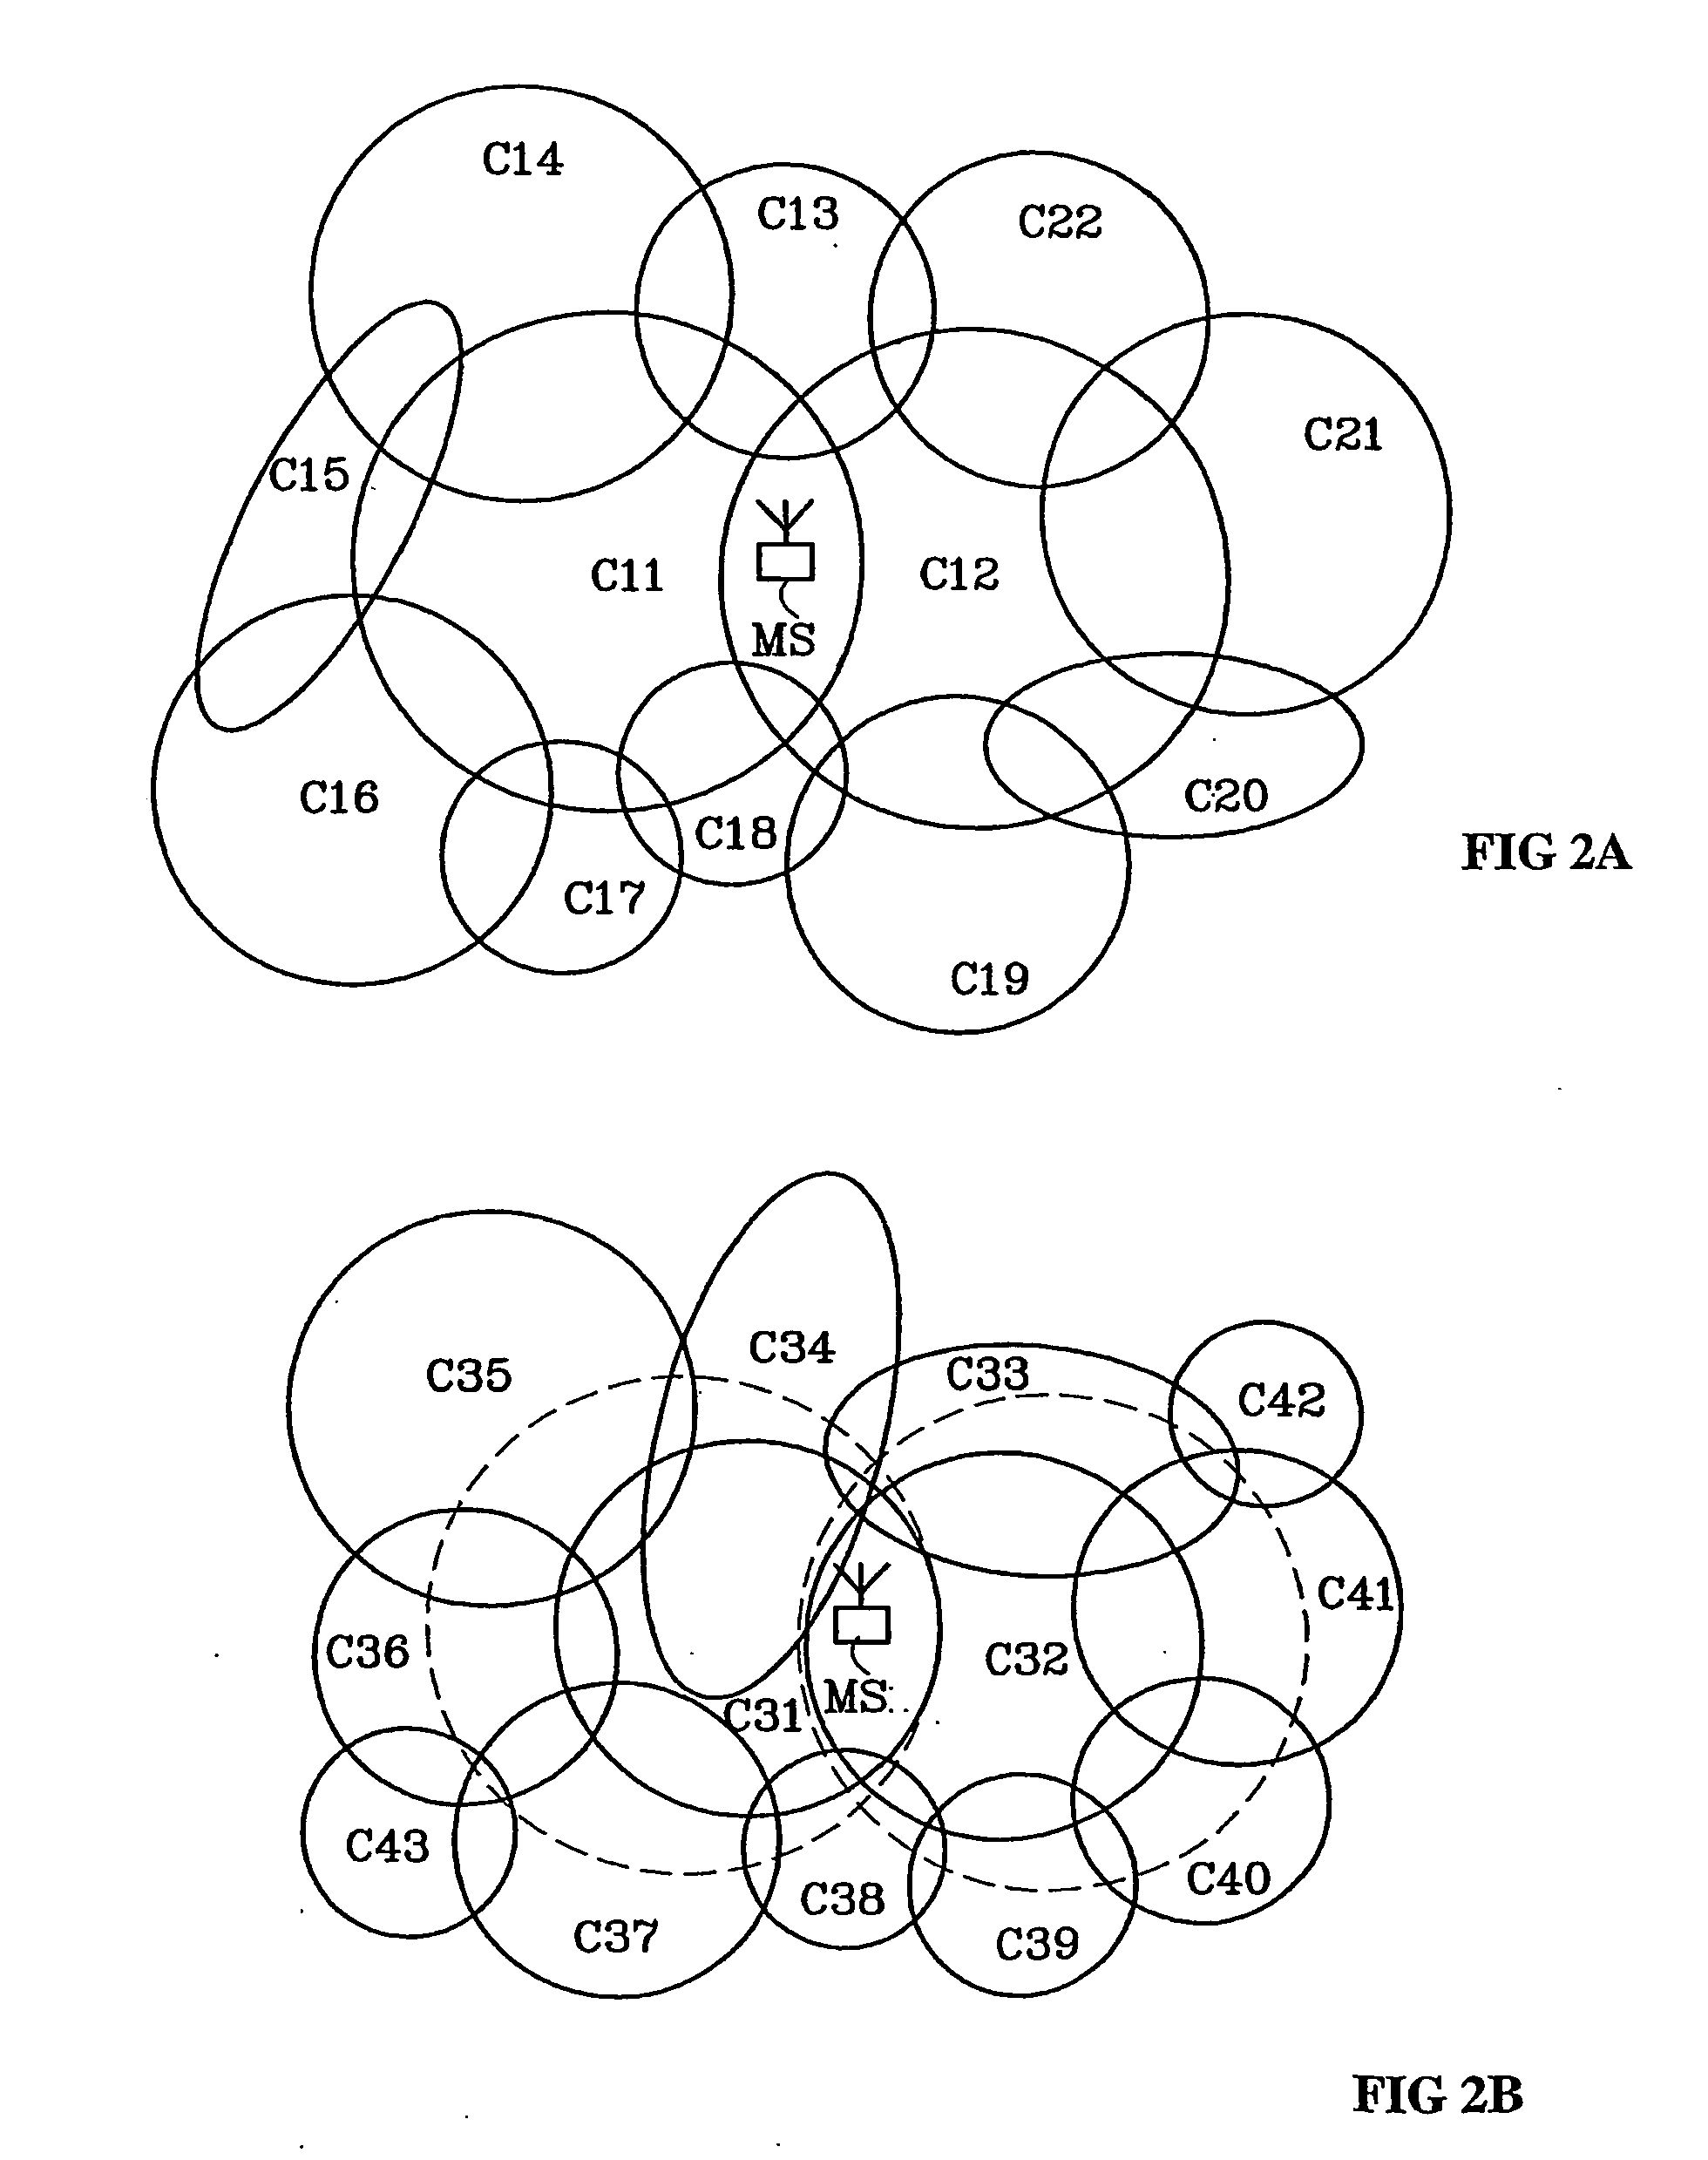 Method for determining a monitored set of cells associated with an active set of cells